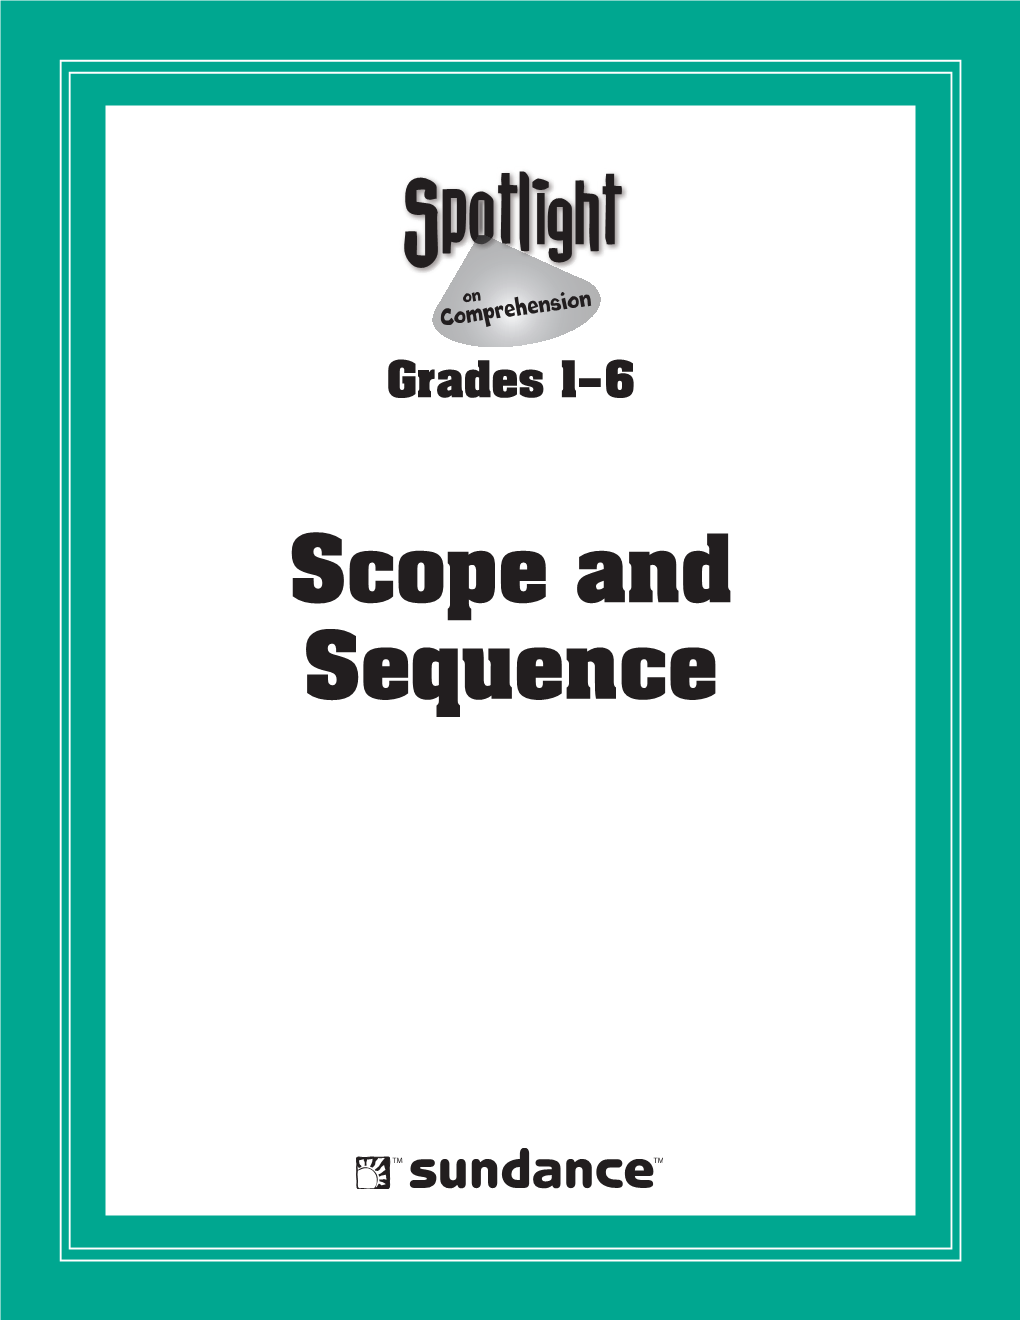 Scope and Sequence Contents